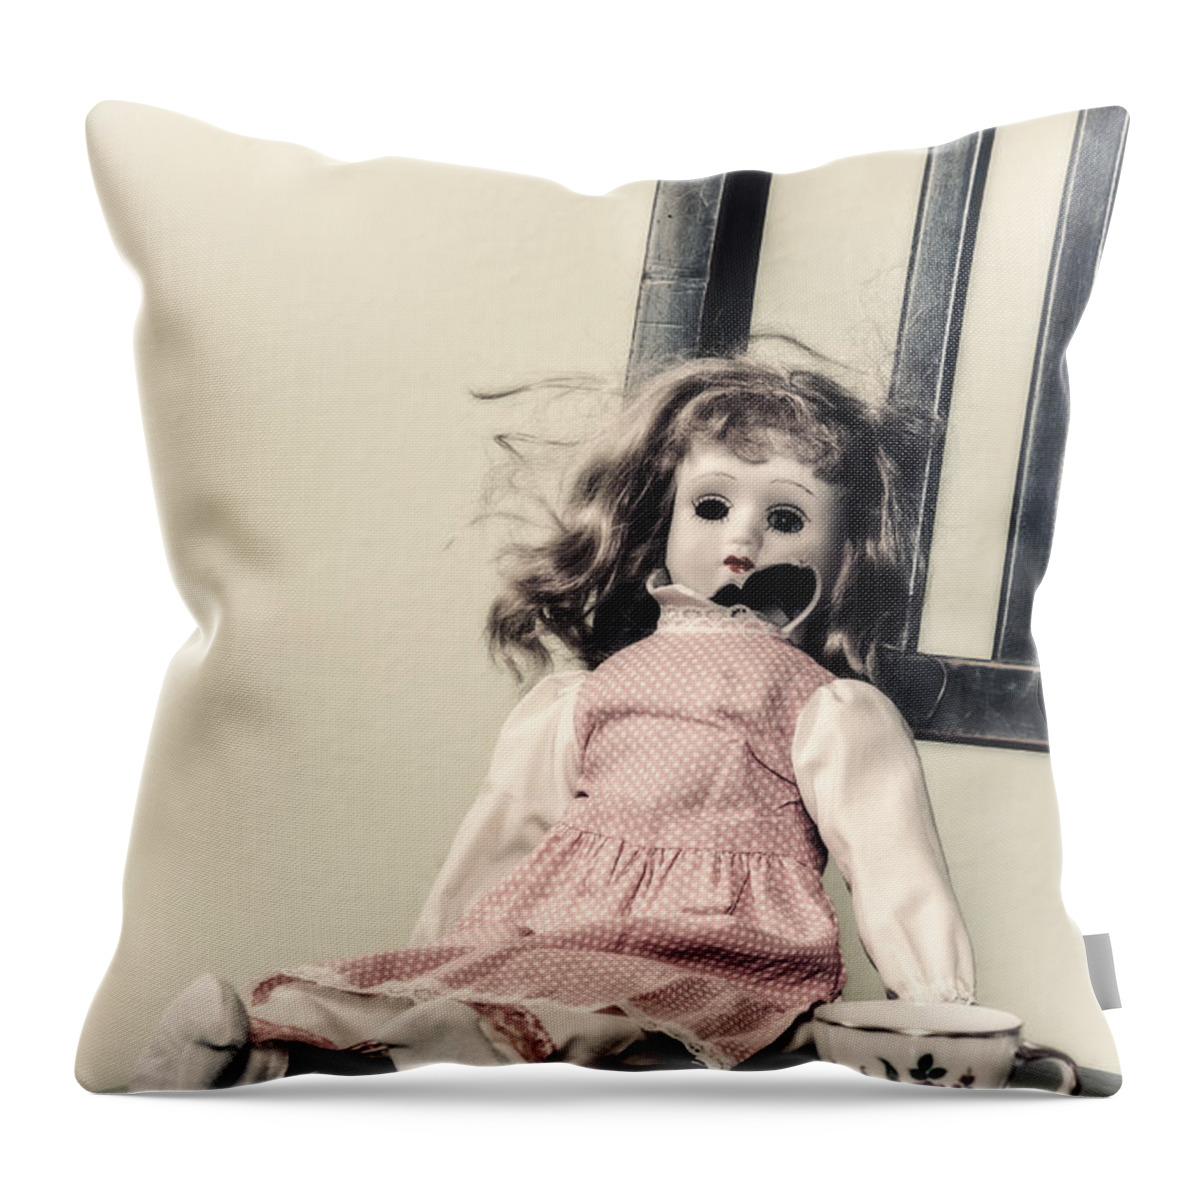 Doll Throw Pillow featuring the photograph Doll With Tea Cup #1 by Joana Kruse